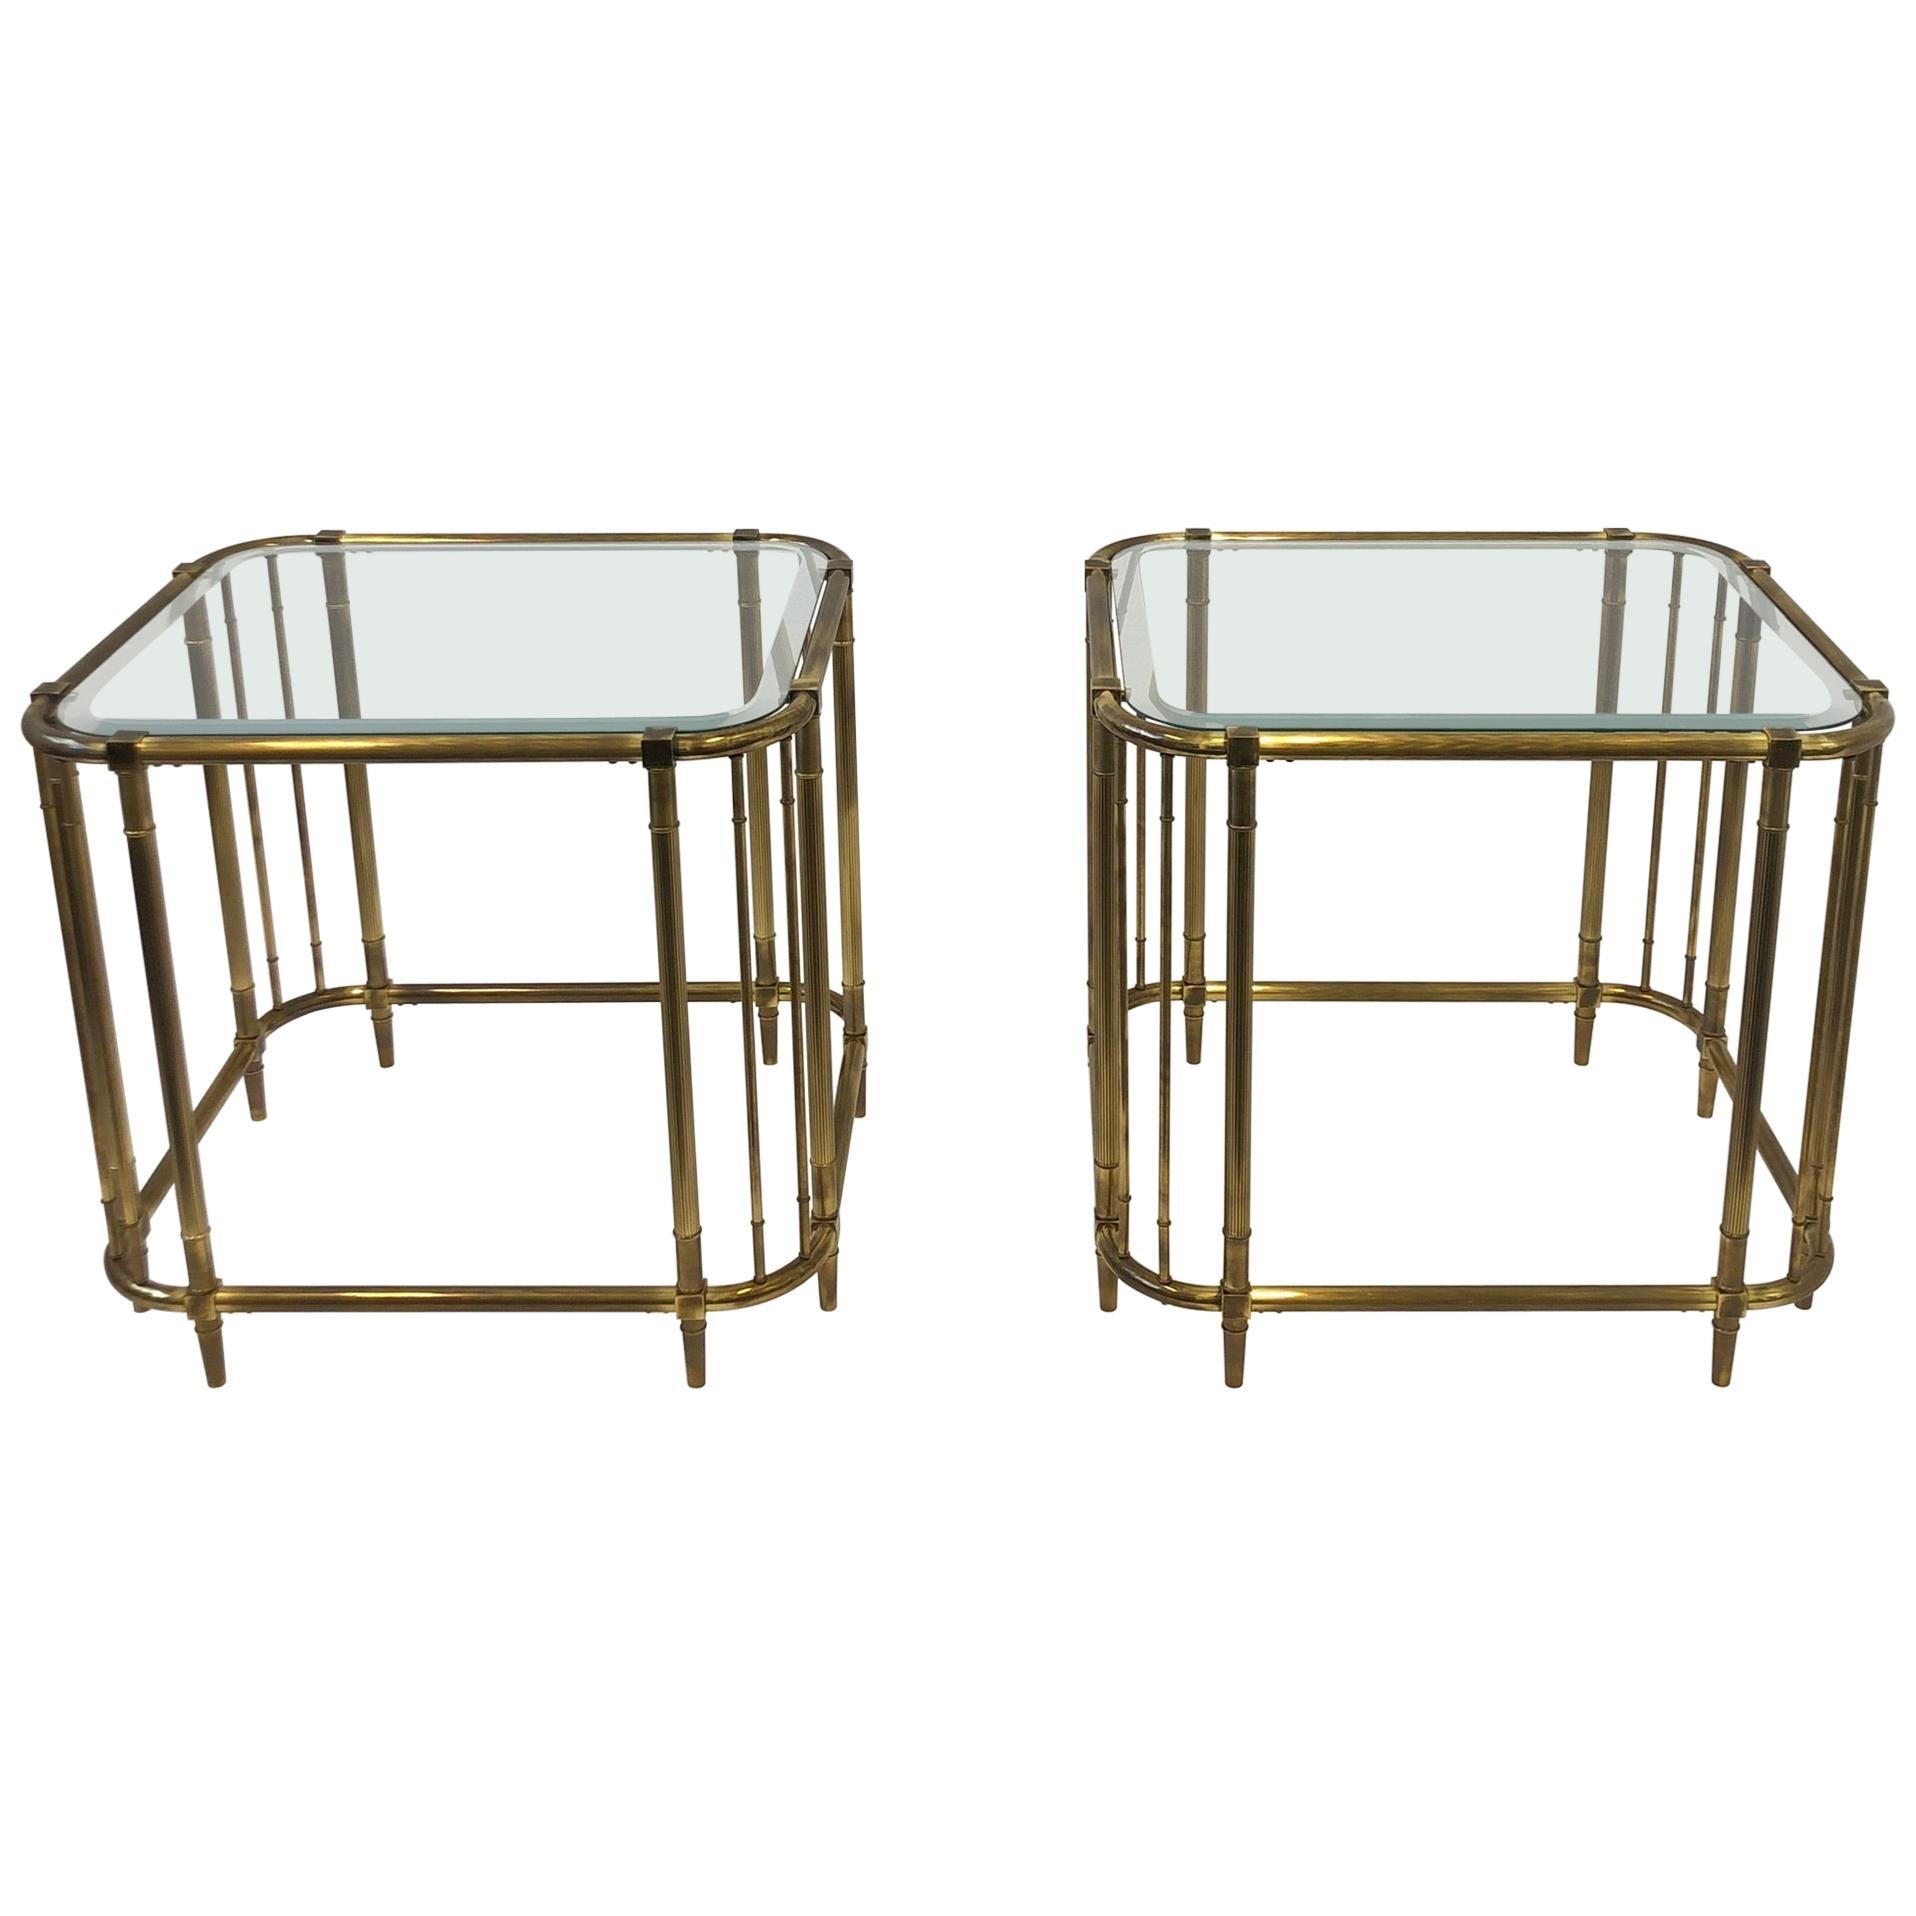 Pair of Aged Brass and Glass Side Tables by Mastercraft